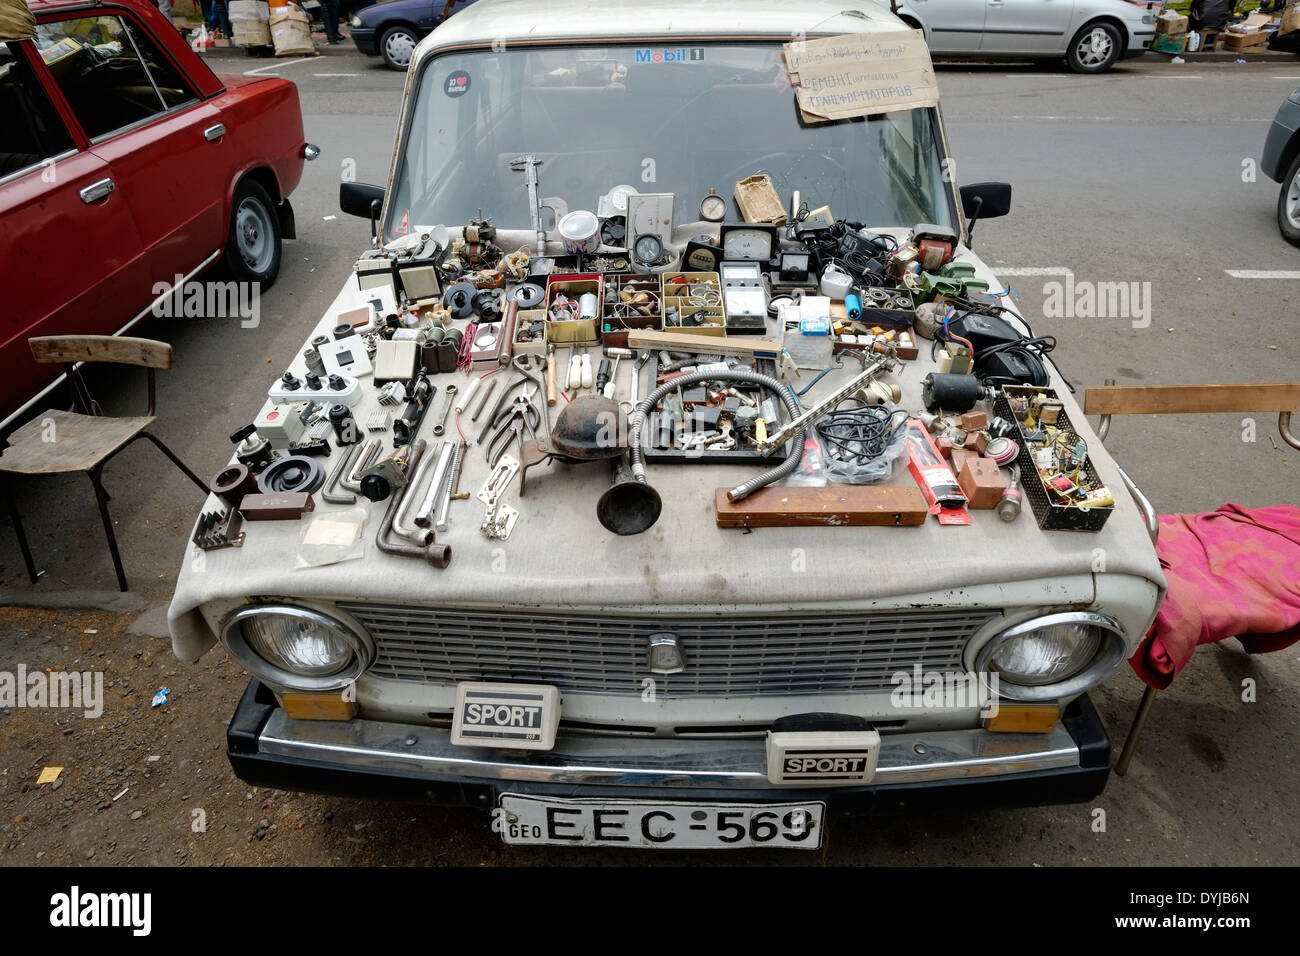 A vendor's items are displayed on the hood of a car at the 'Dry Bridge Bazaar' market  for used objects in Tbilisi capital of the Republic of Georgia Stock Photo